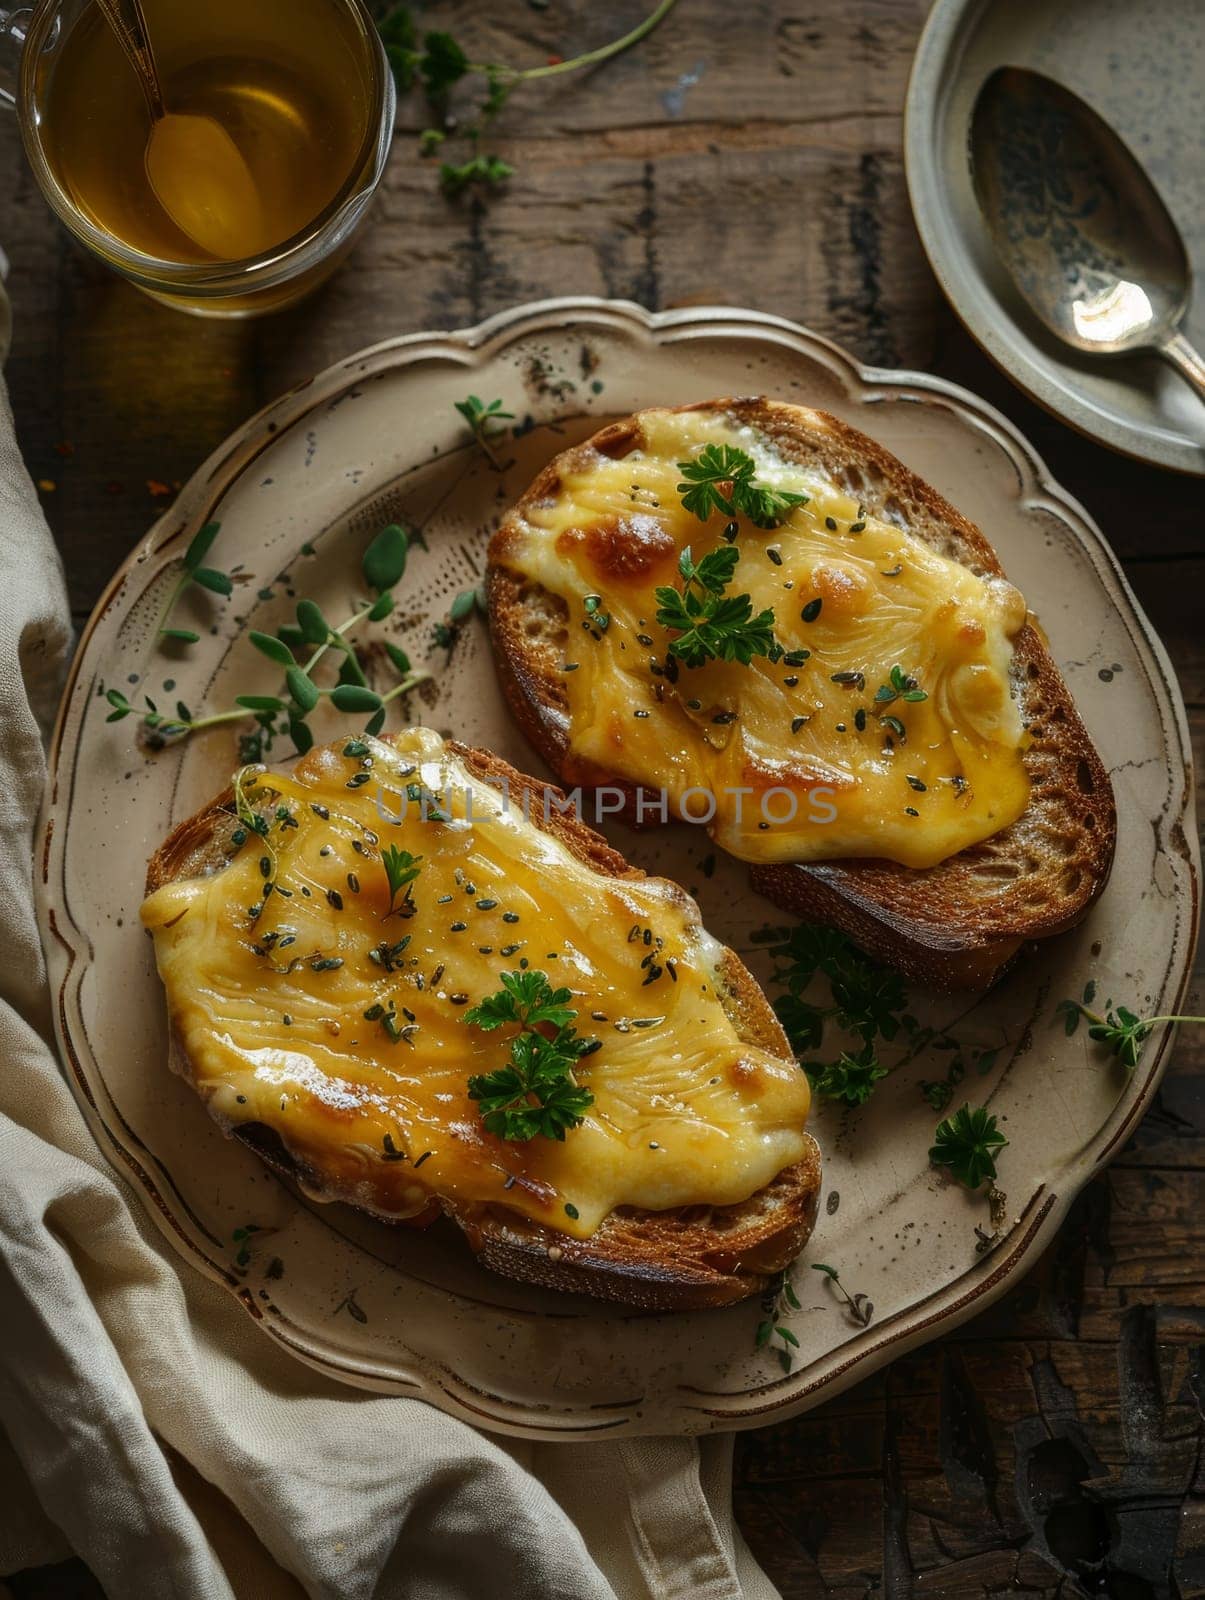 Welsh rarebit, a classic British dish of toasted bread topped with a rich, savory cheese sauce, served on a vintage ceramic plate. The traditional flavors and textures of Welsh culinary heritage. by sfinks